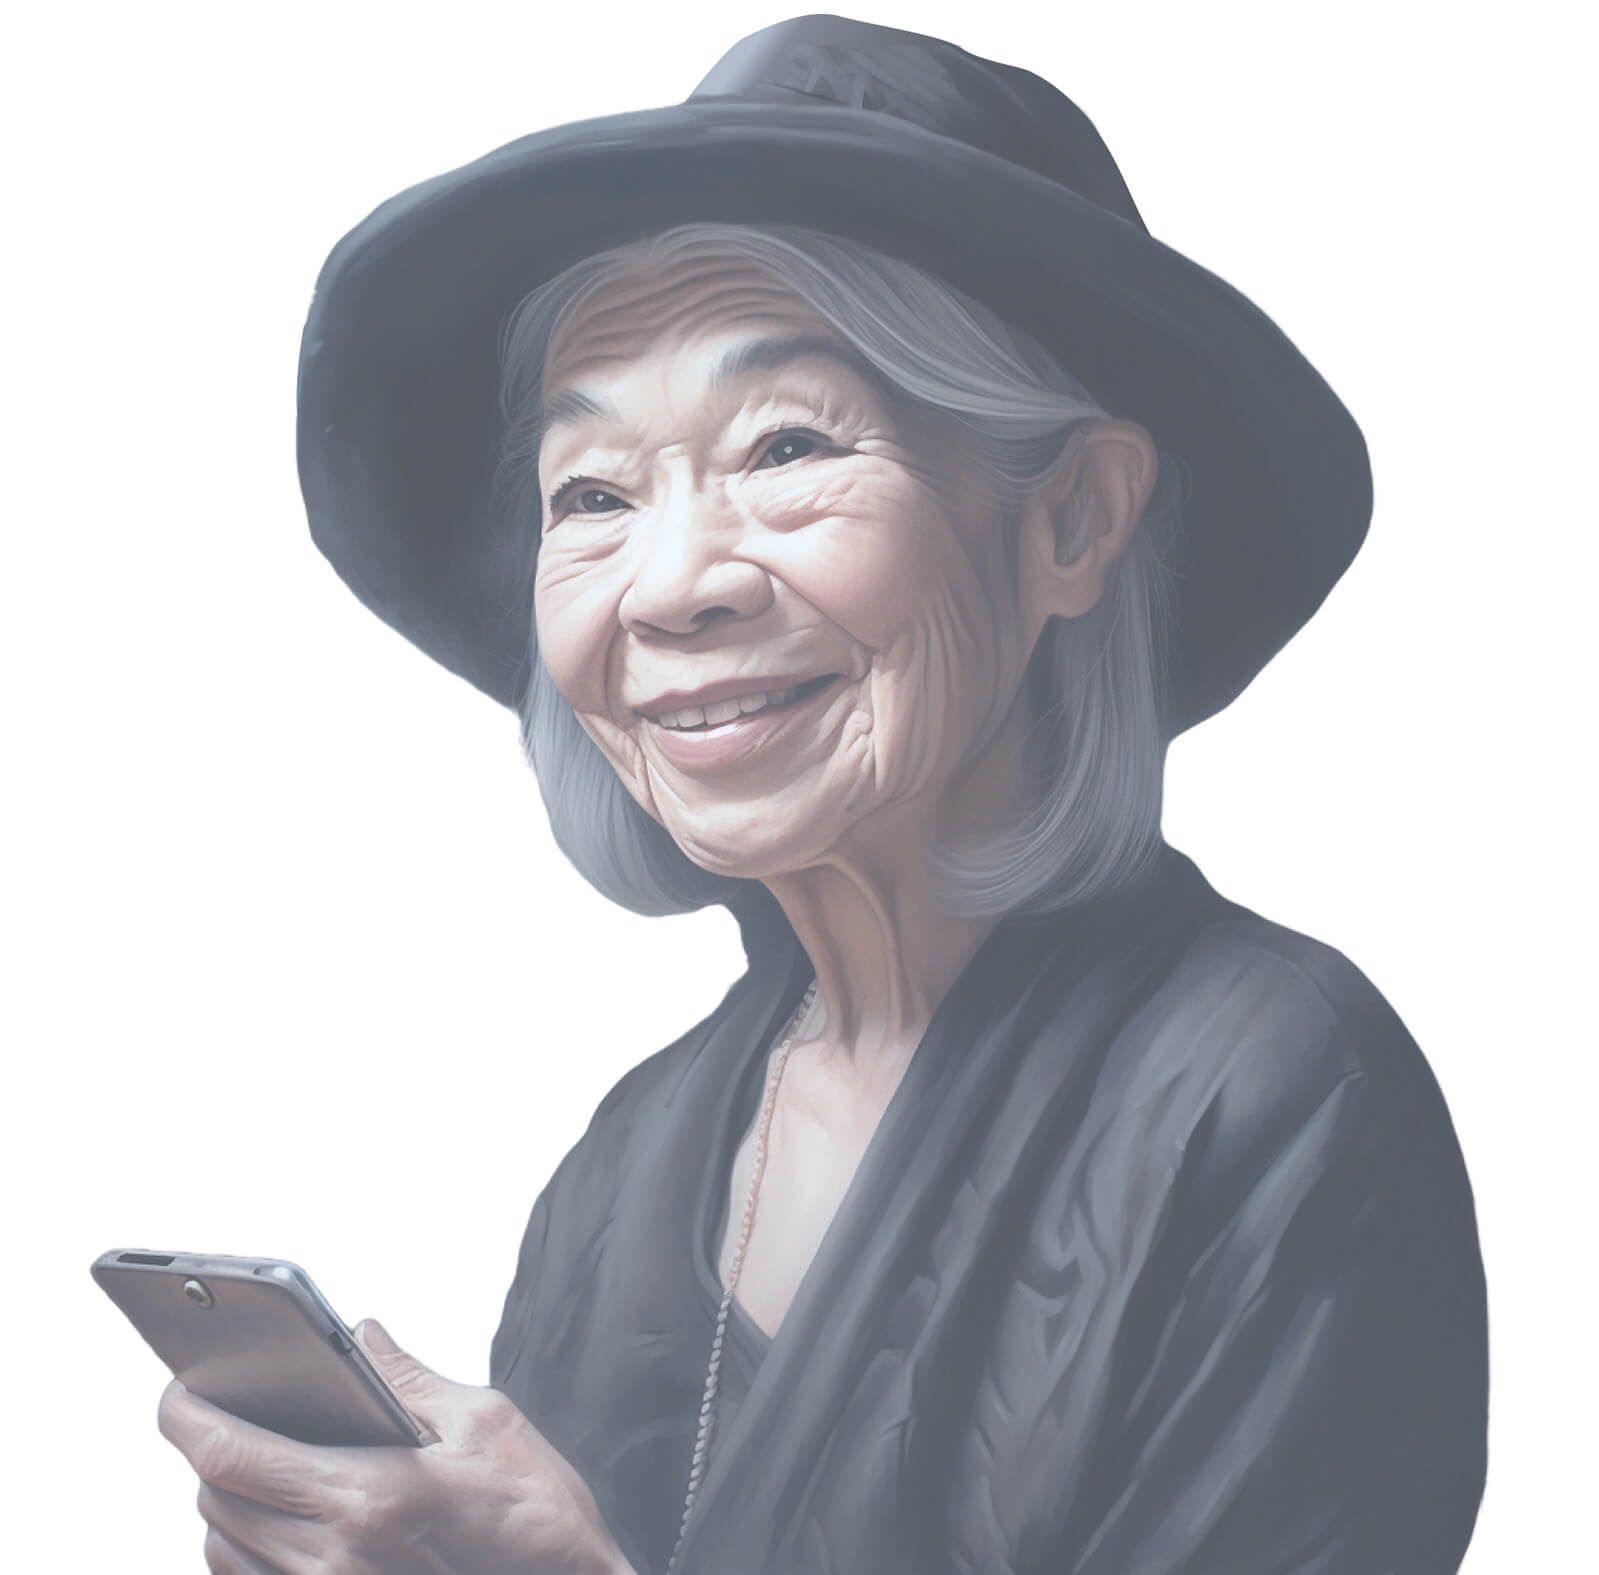 Senior Asian woman in black wide brim hat holding a cell phone smiling.